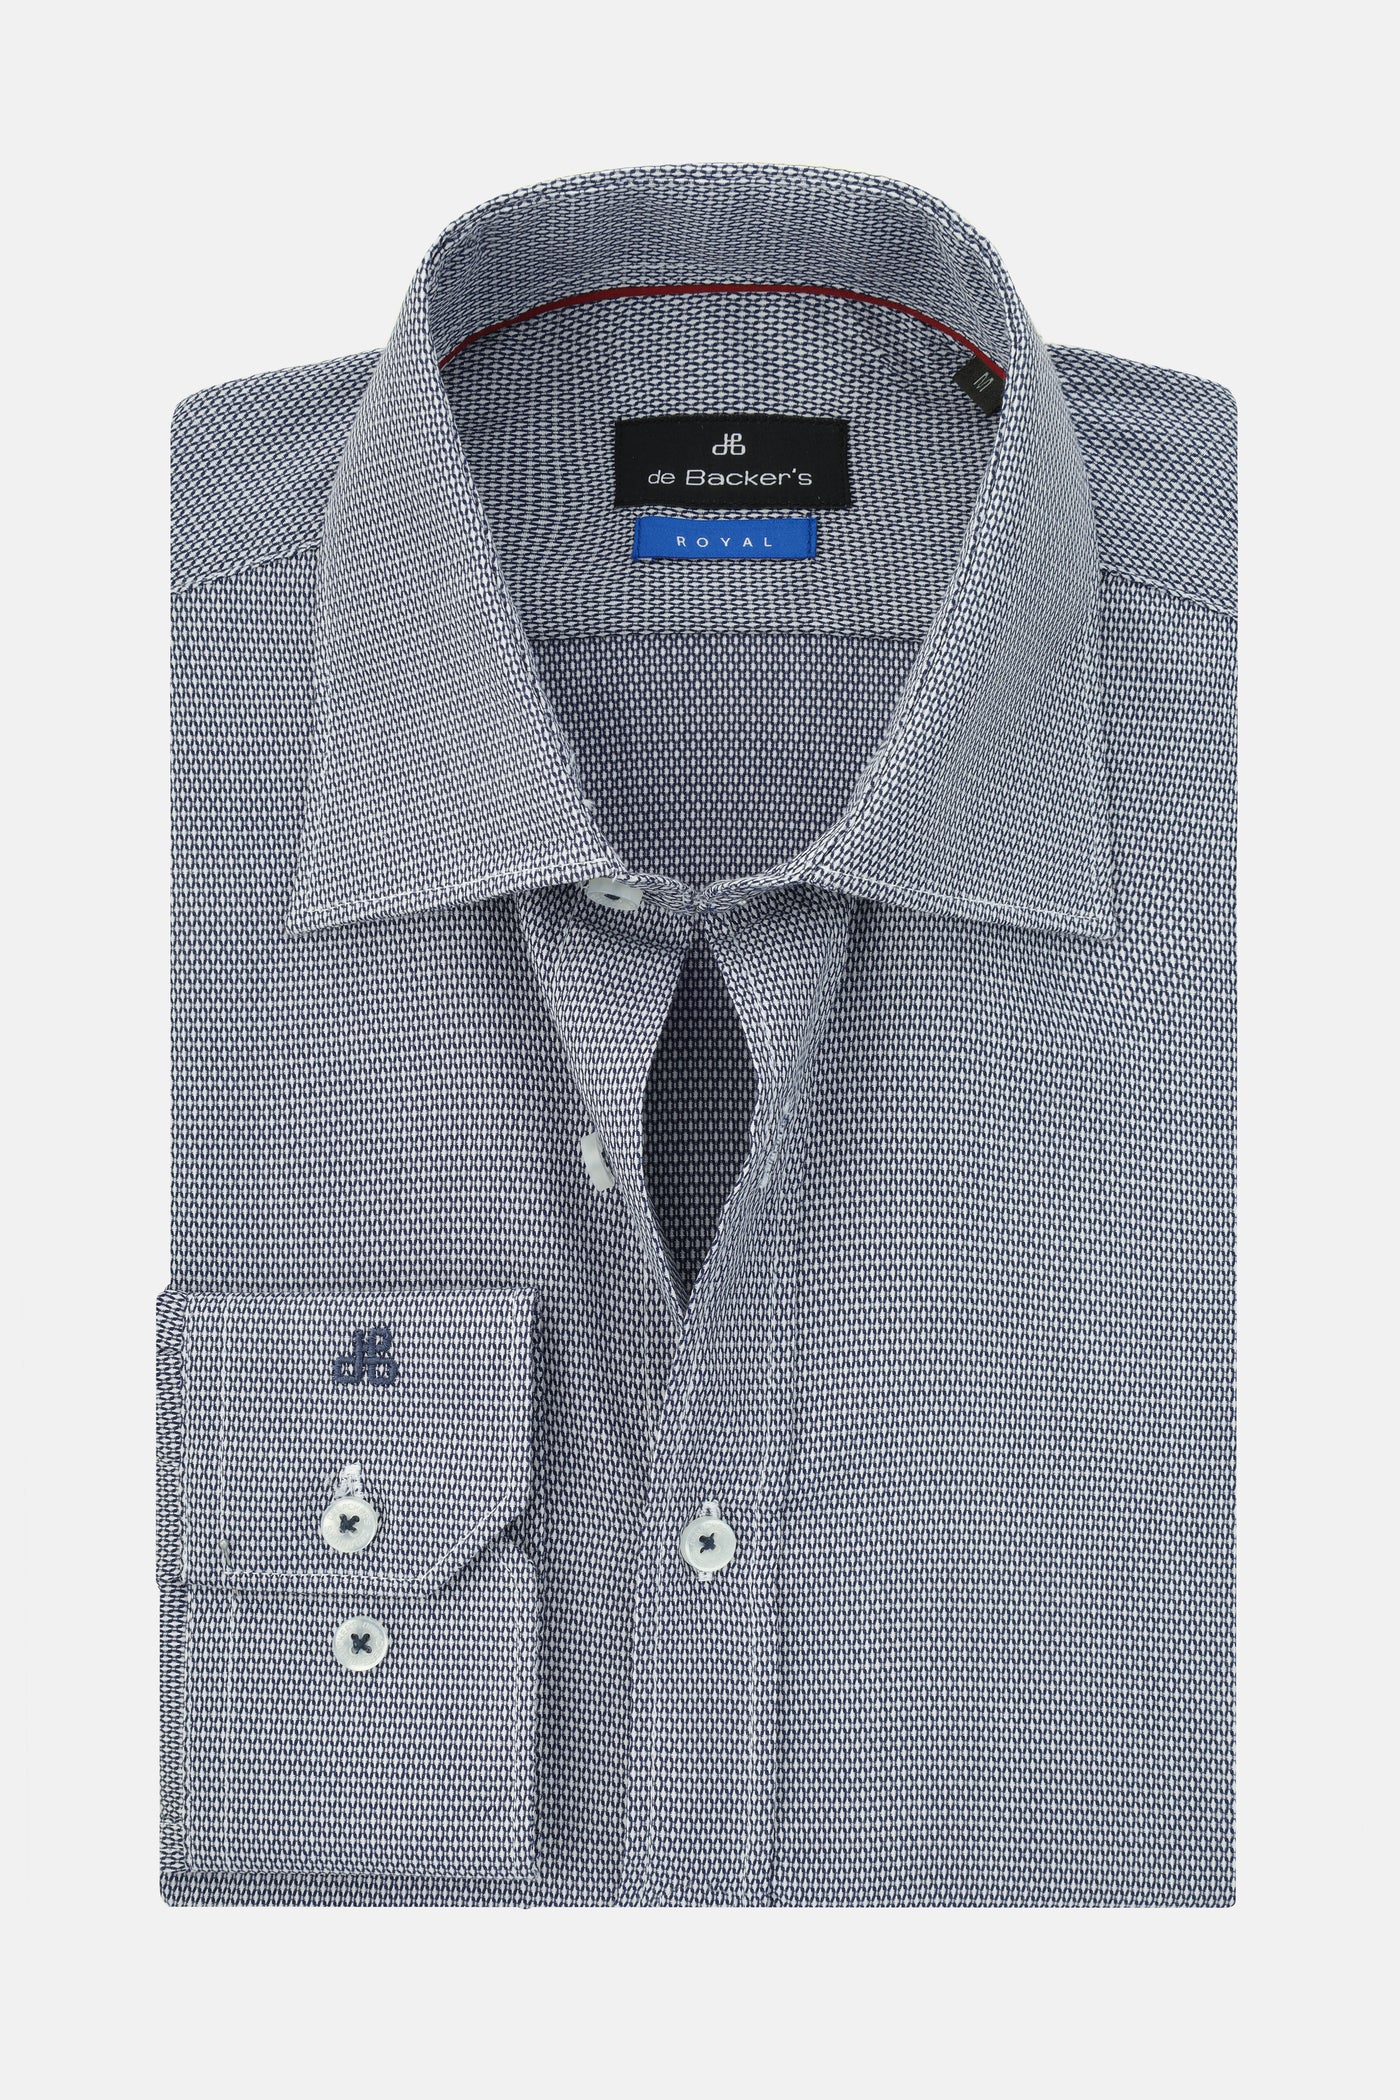 patterned Navy  & White Cotton Smart Casual Shirt